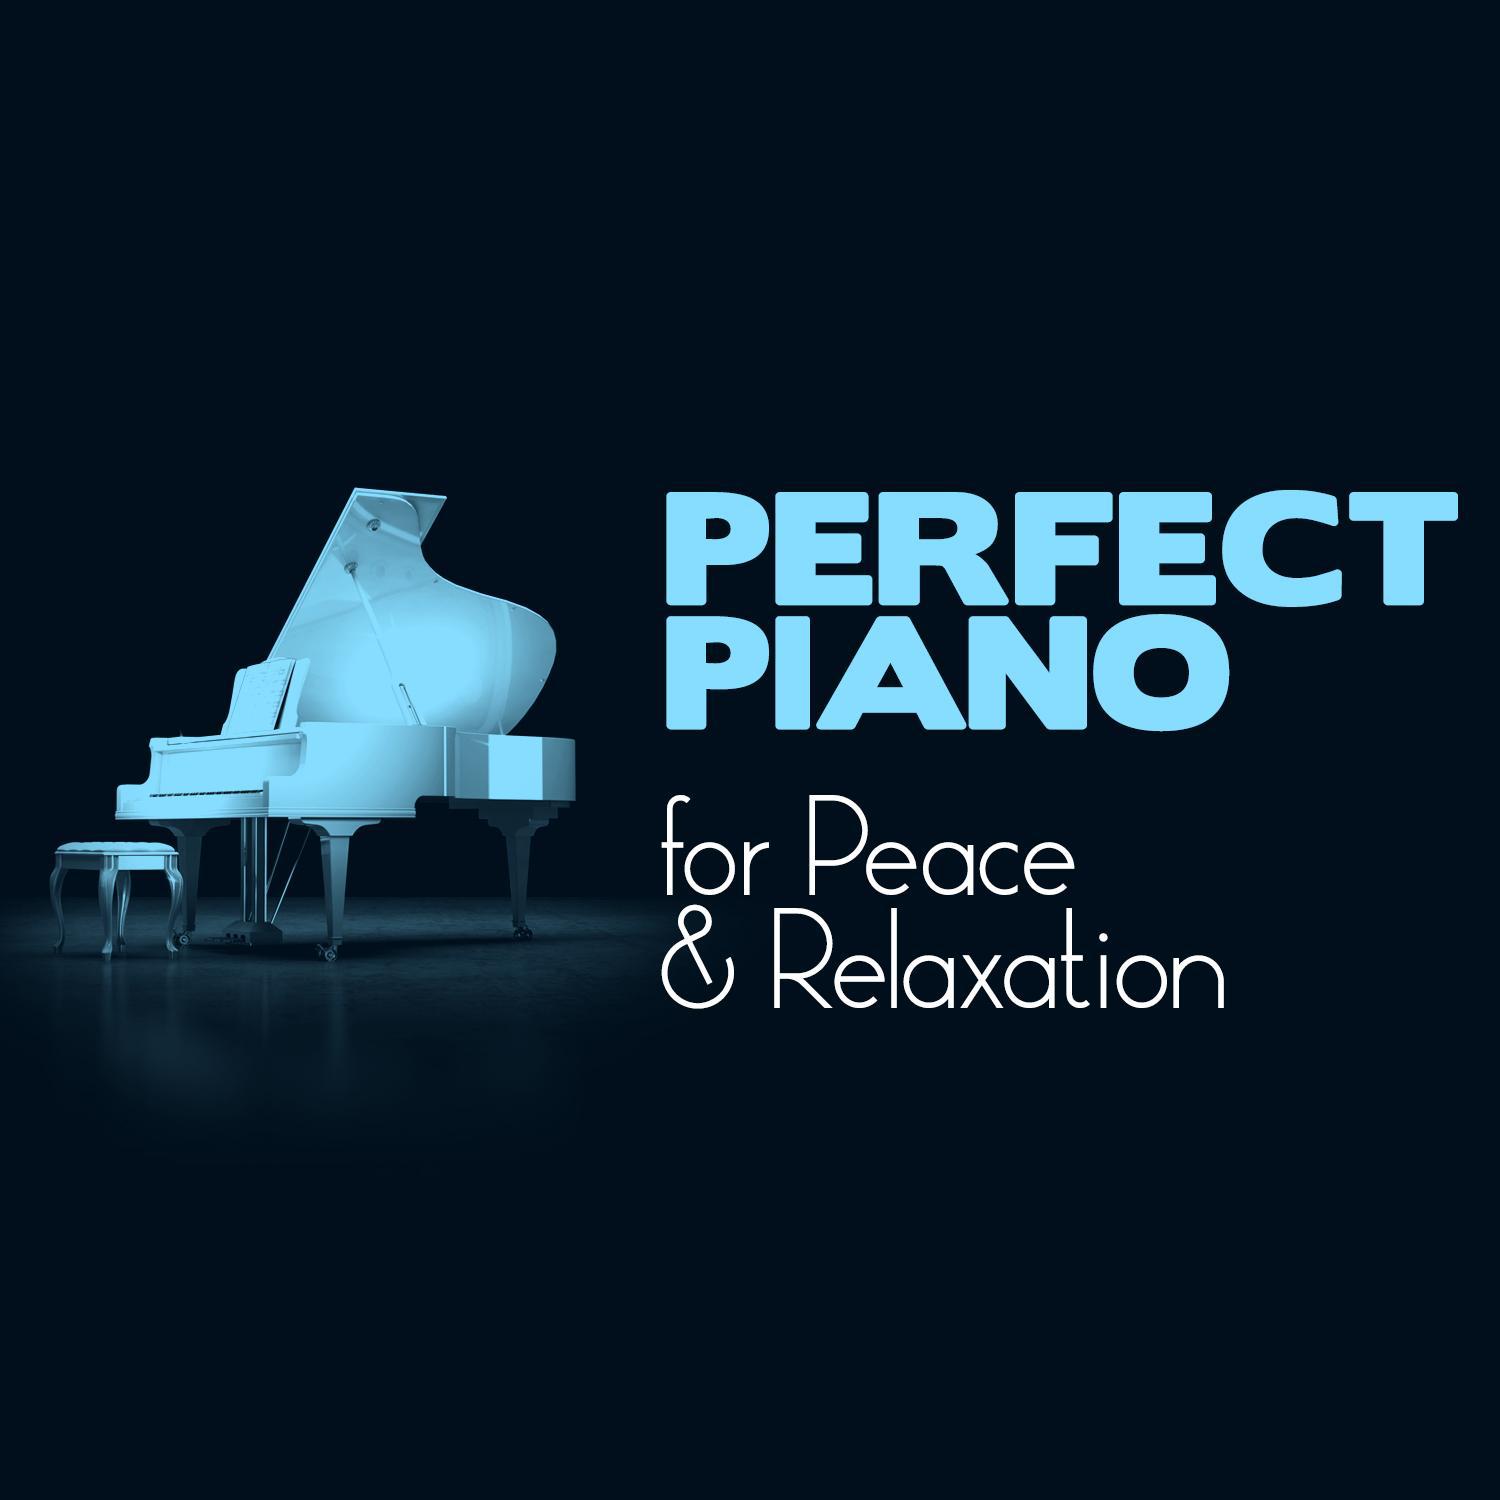 Perfect Piano for Peace & Relaxation